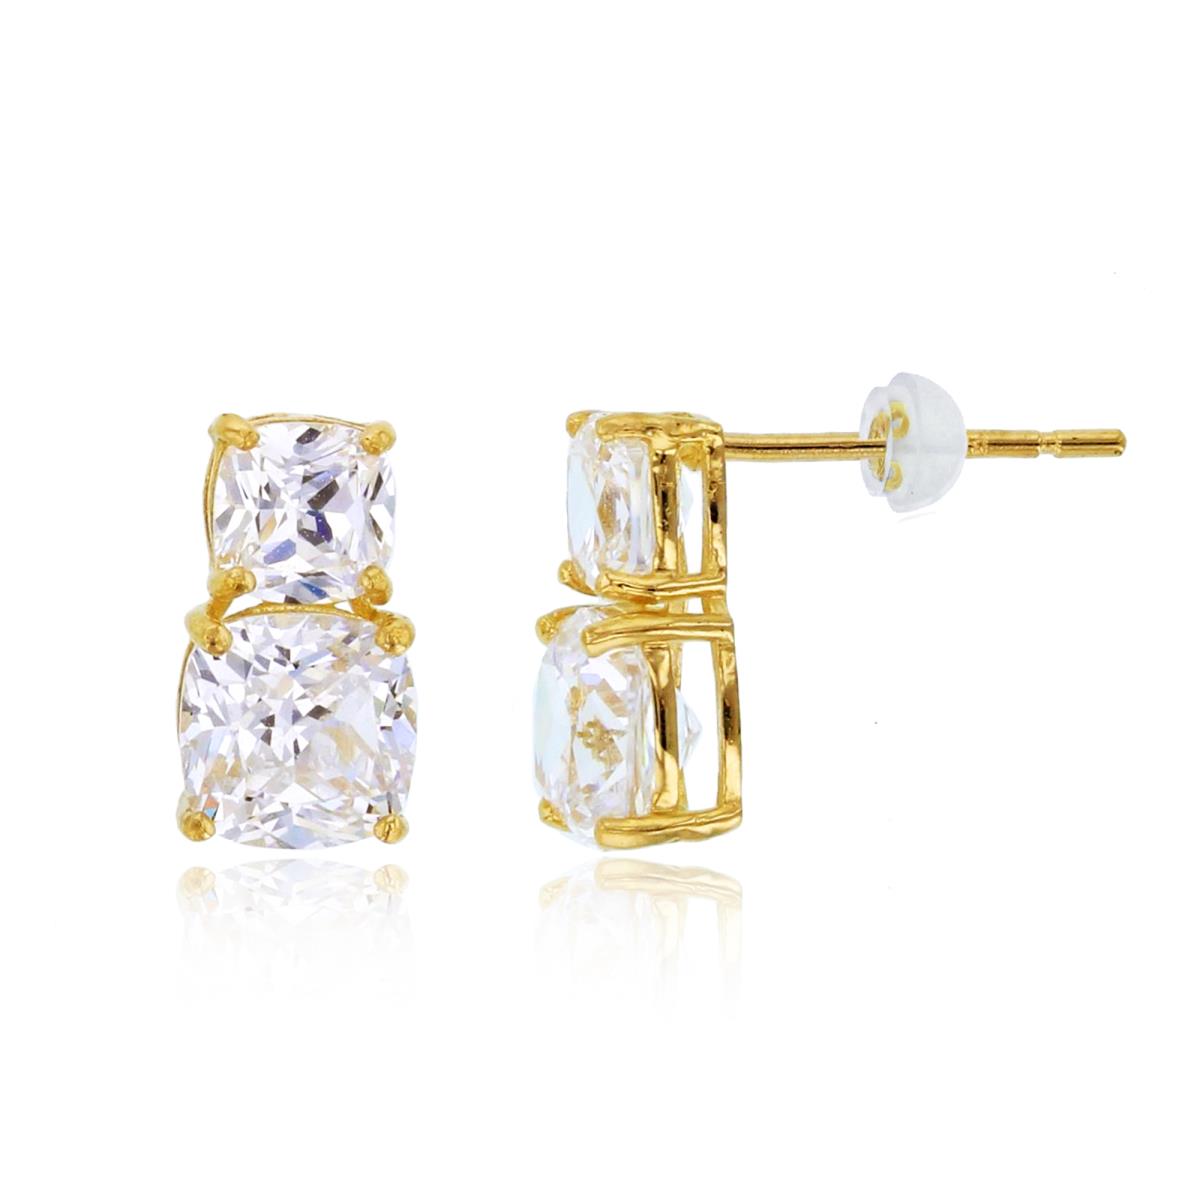 14K Yellow Gold 4mm & 5mm Cush CZ Studs with Silicon Backs